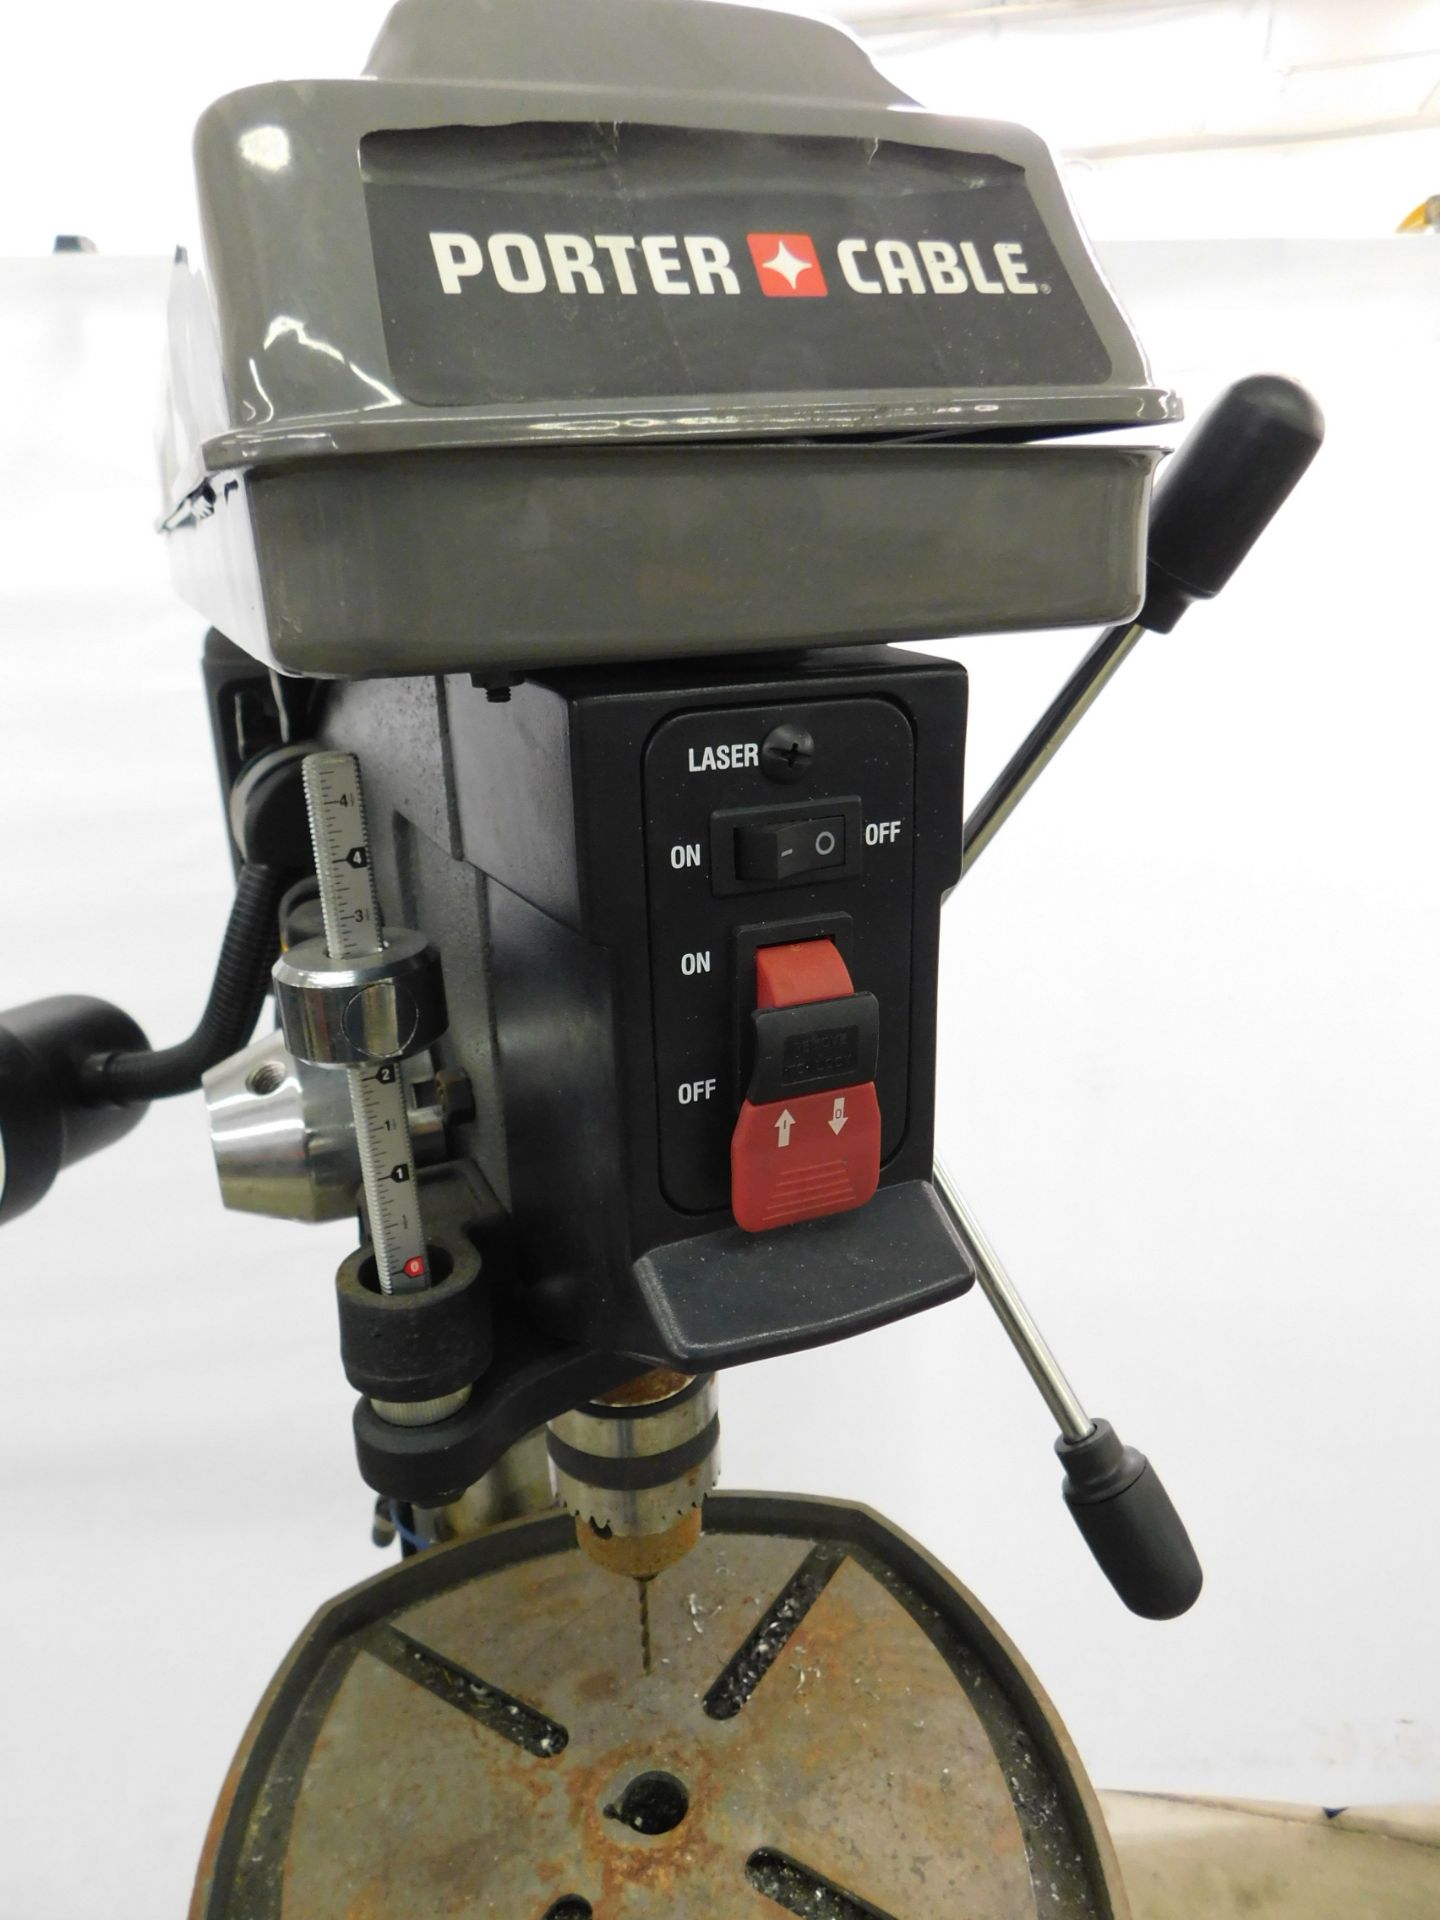 Porter Cable Single Spindle Drill Press, 12-Speed, SN 066895 - Image 2 of 9